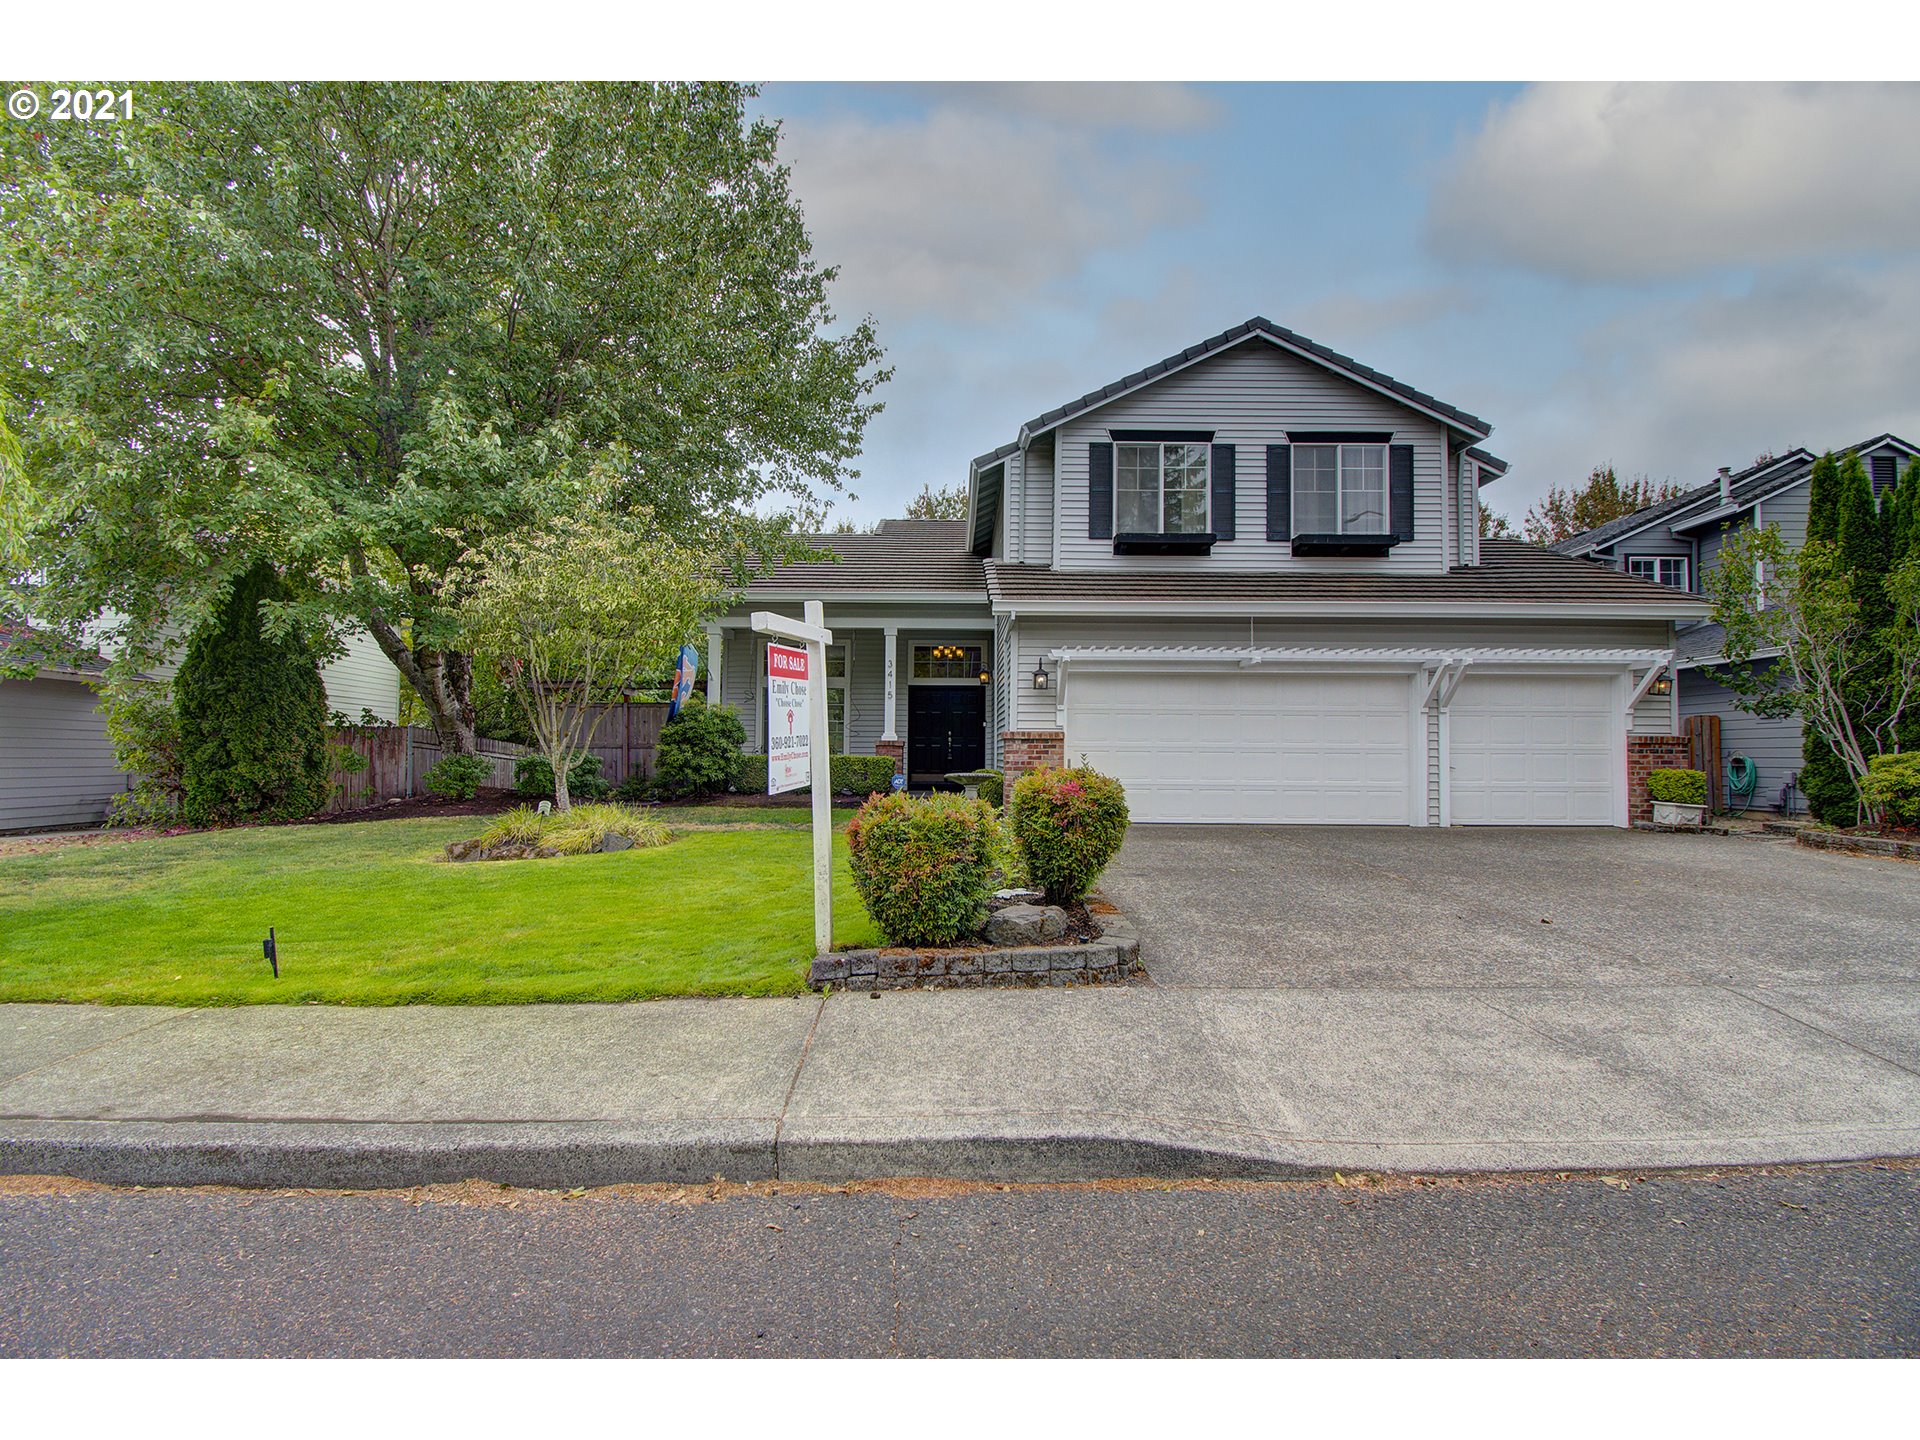 3415 NW 116TH WAY (1 of 32)